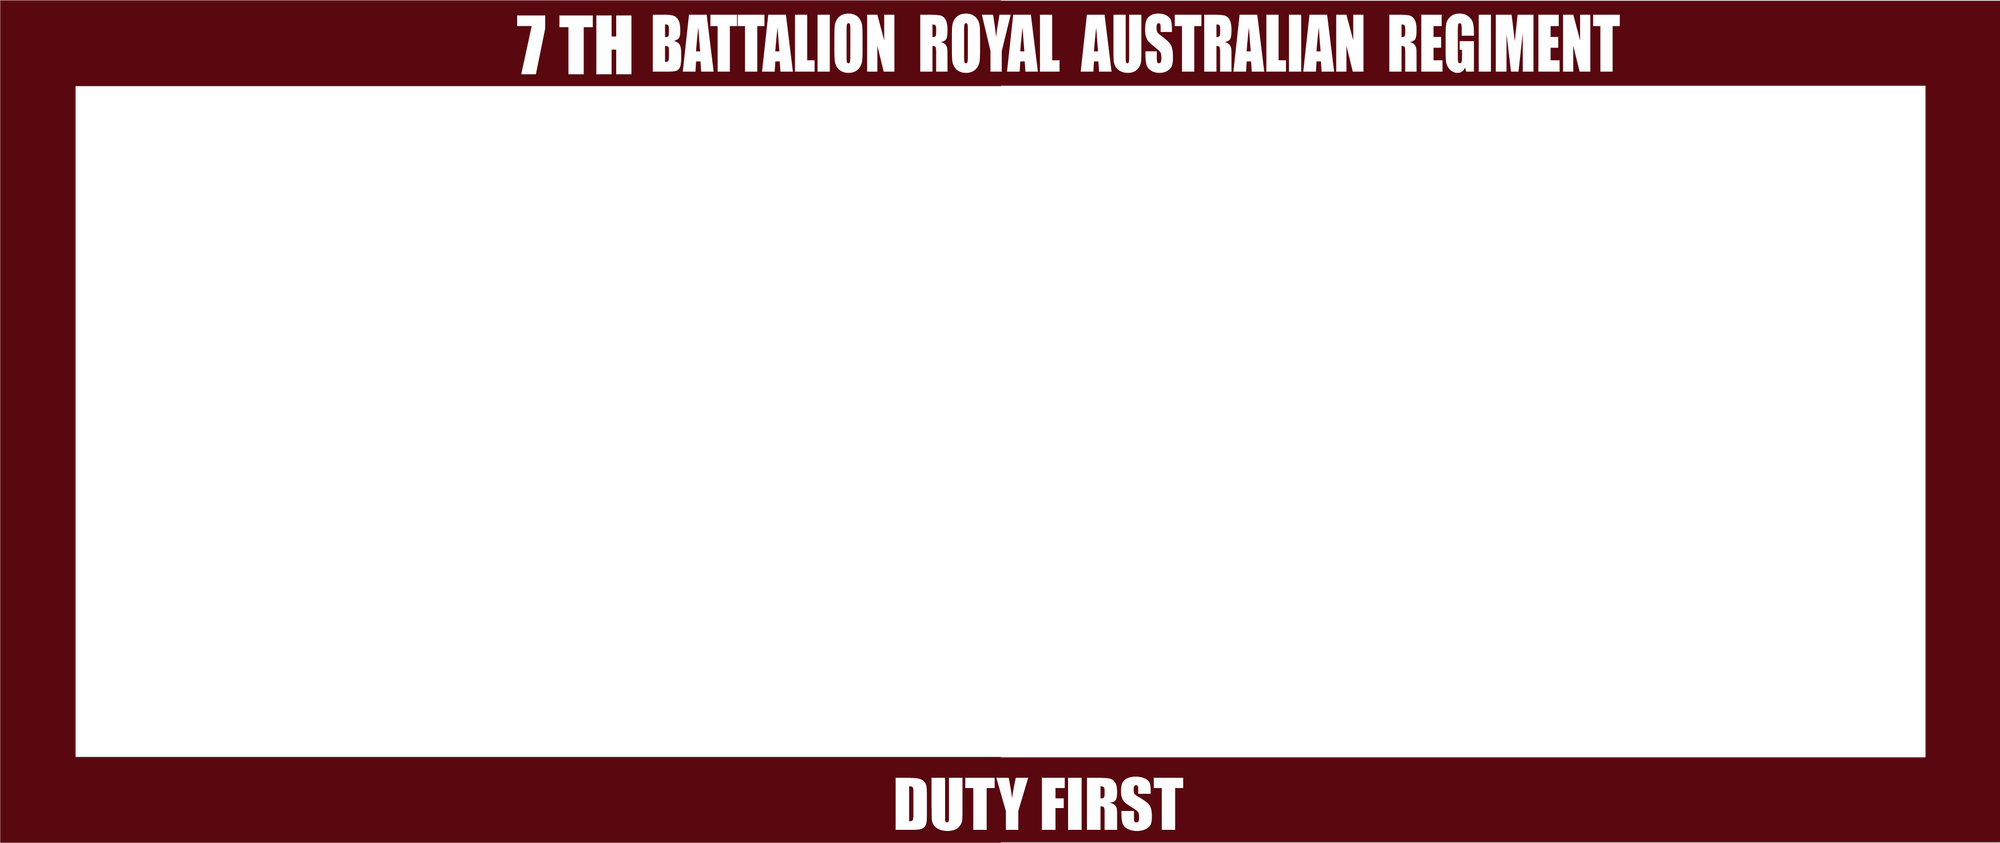 7 RAR BATTALION COLOUR MOTORCYCLE LICENCE PLATE COVER ONLY 4 LEFT